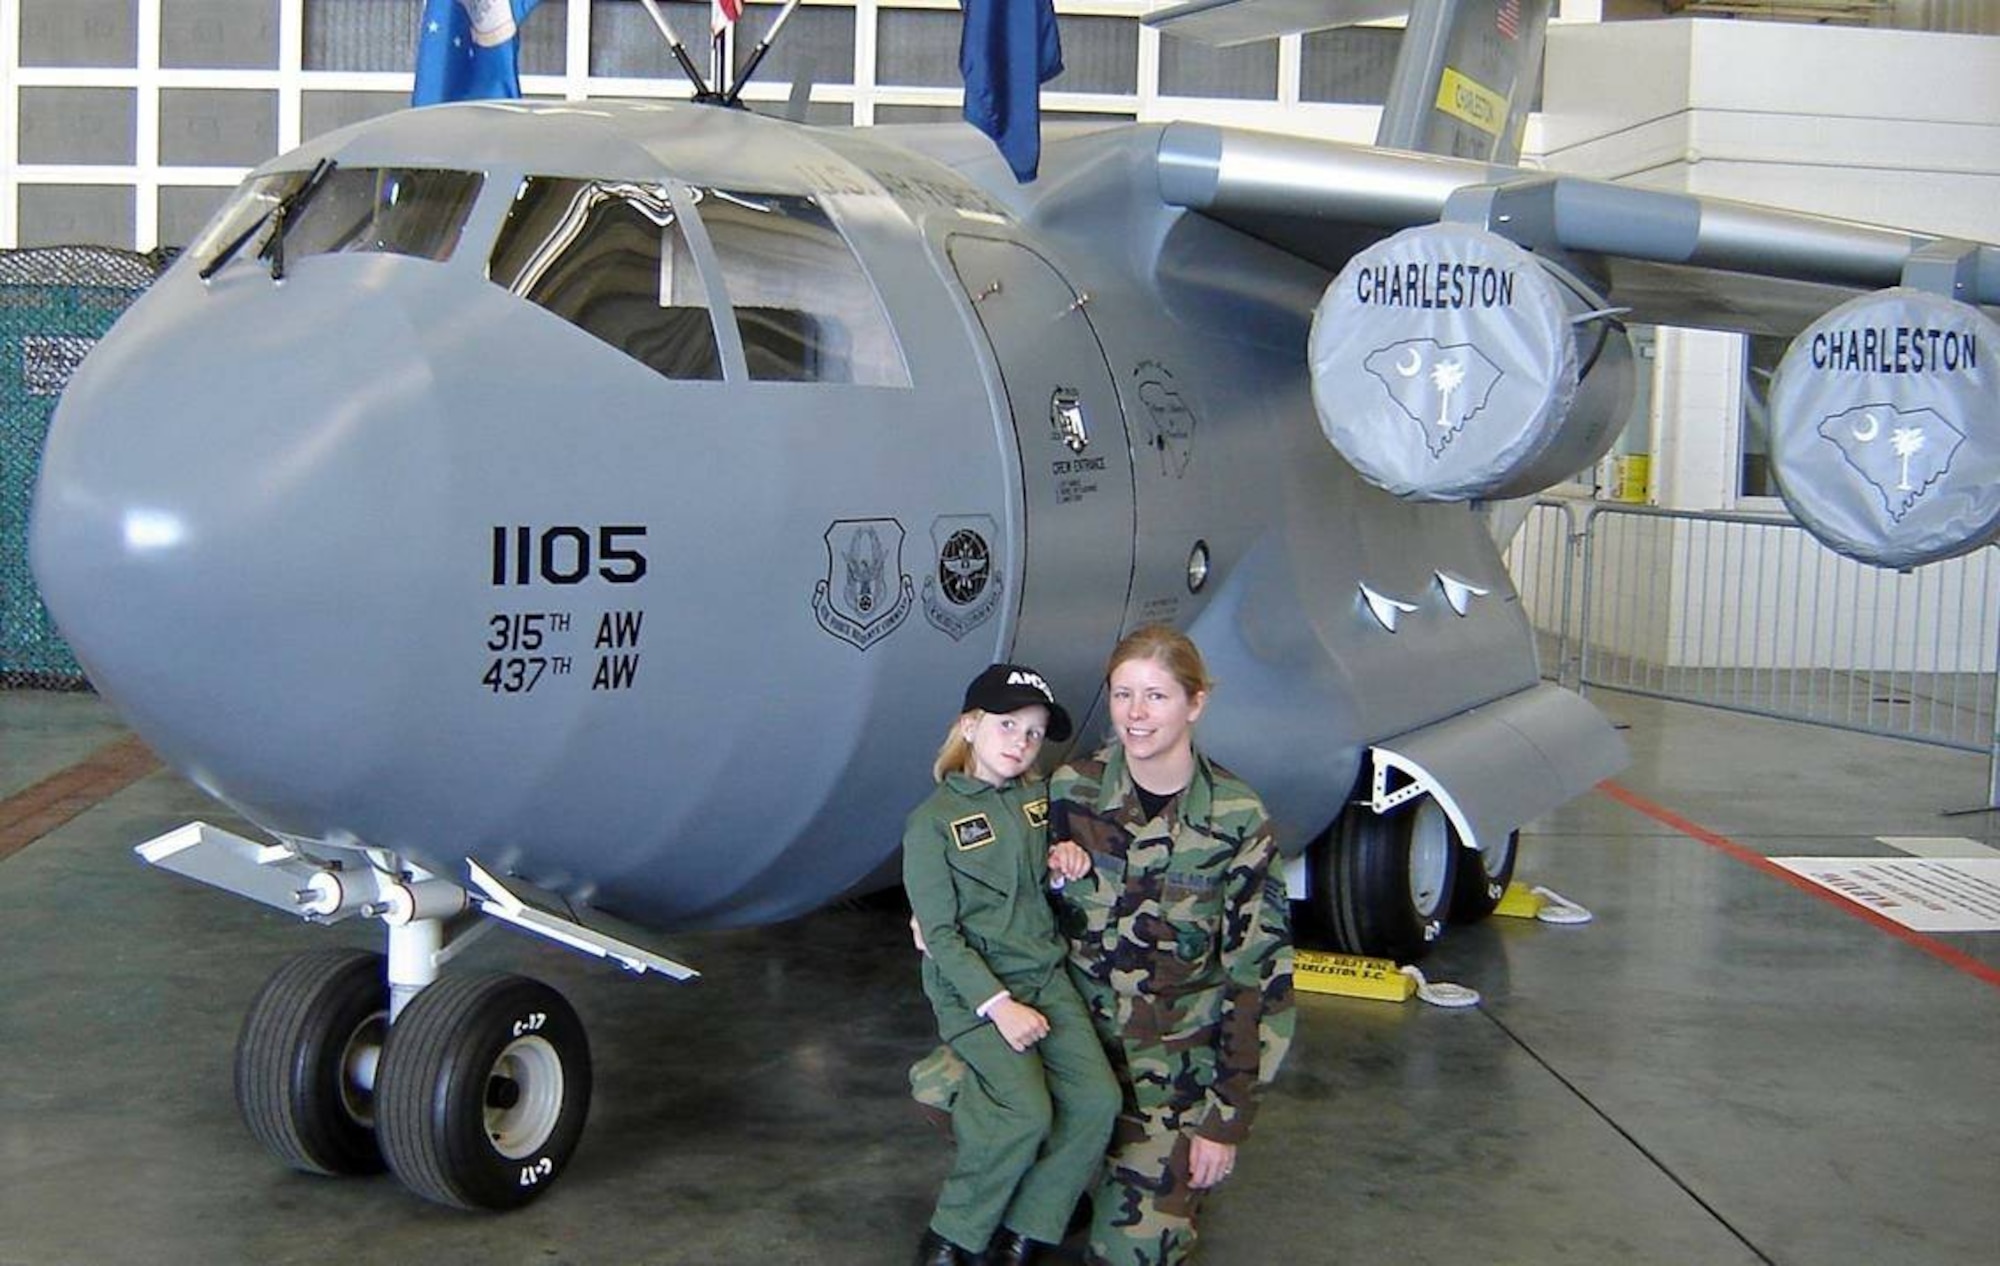 Staff Sgt. Ivy Abercrombie, 437th Aircraft Maintenance Squadron, and her daughter Hanah Abercrombie pose for a photo March 17, 2006, at Joint Base Charleston, S.C. Hanah joined the Air Force and graduated basic training December 2017, following in her parent's footsteps.  (Courtesy photo